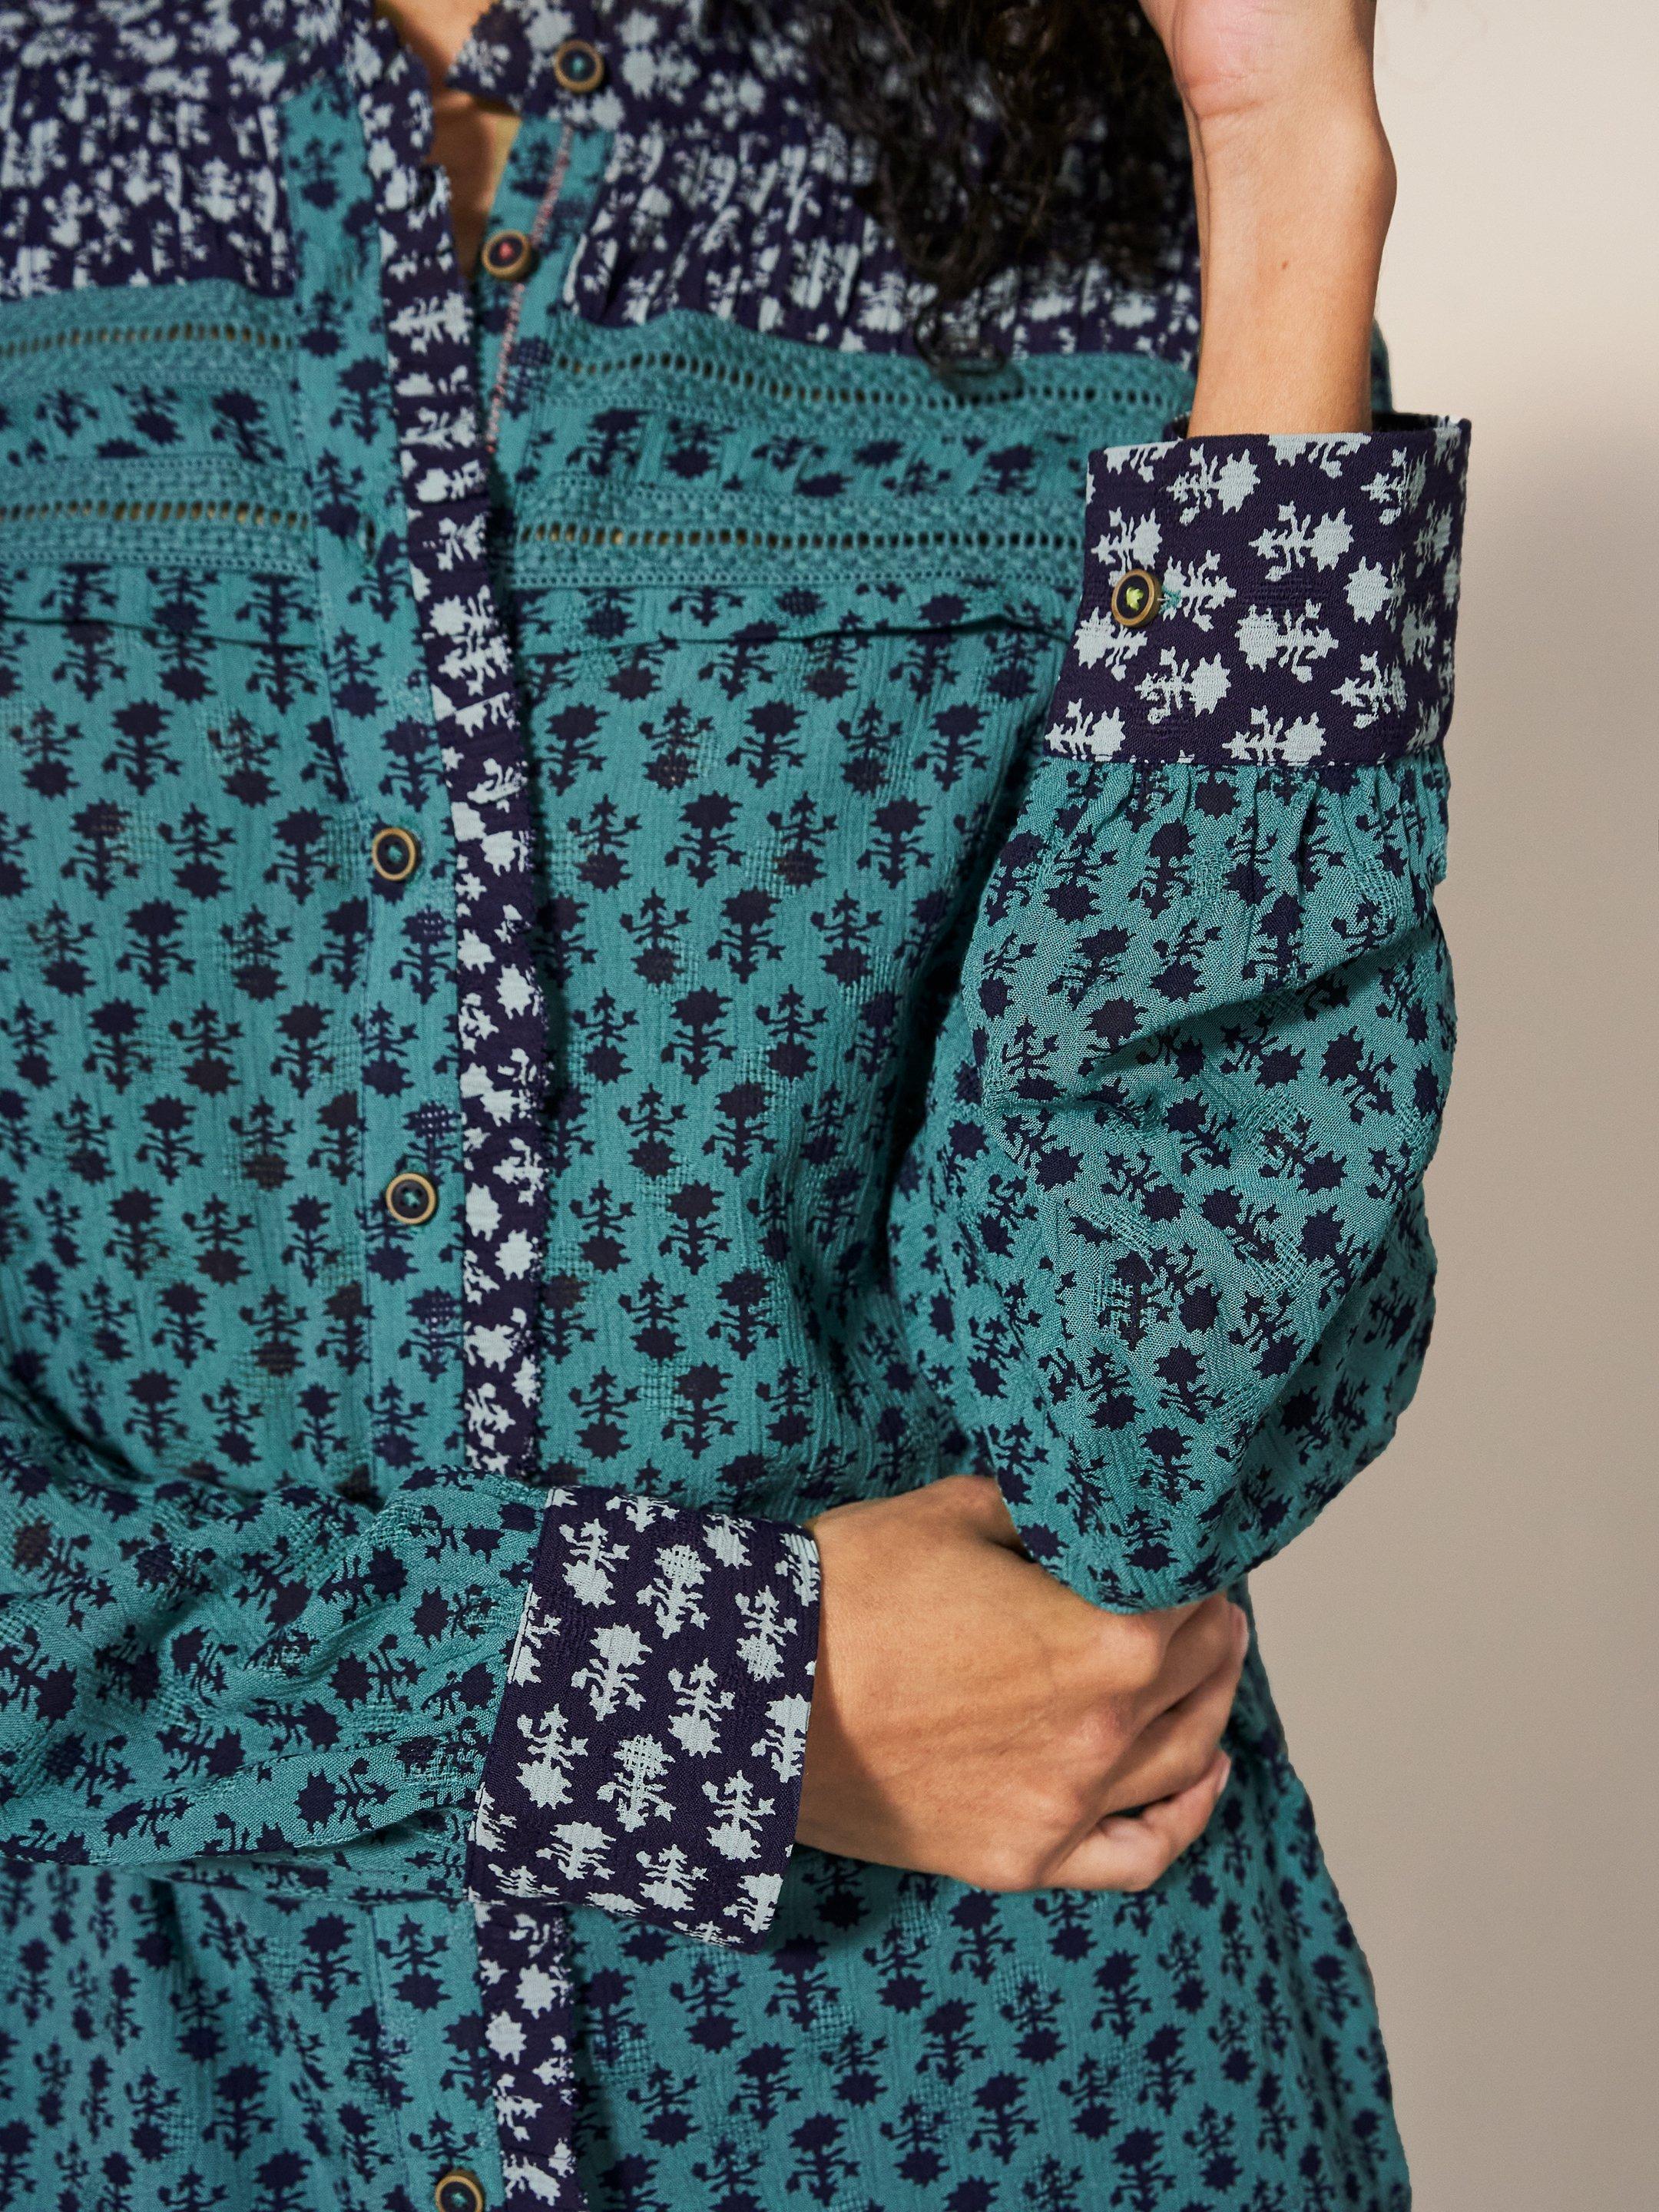 Mabel Mixed Print Shirt in TEAL MLT - MODEL DETAIL